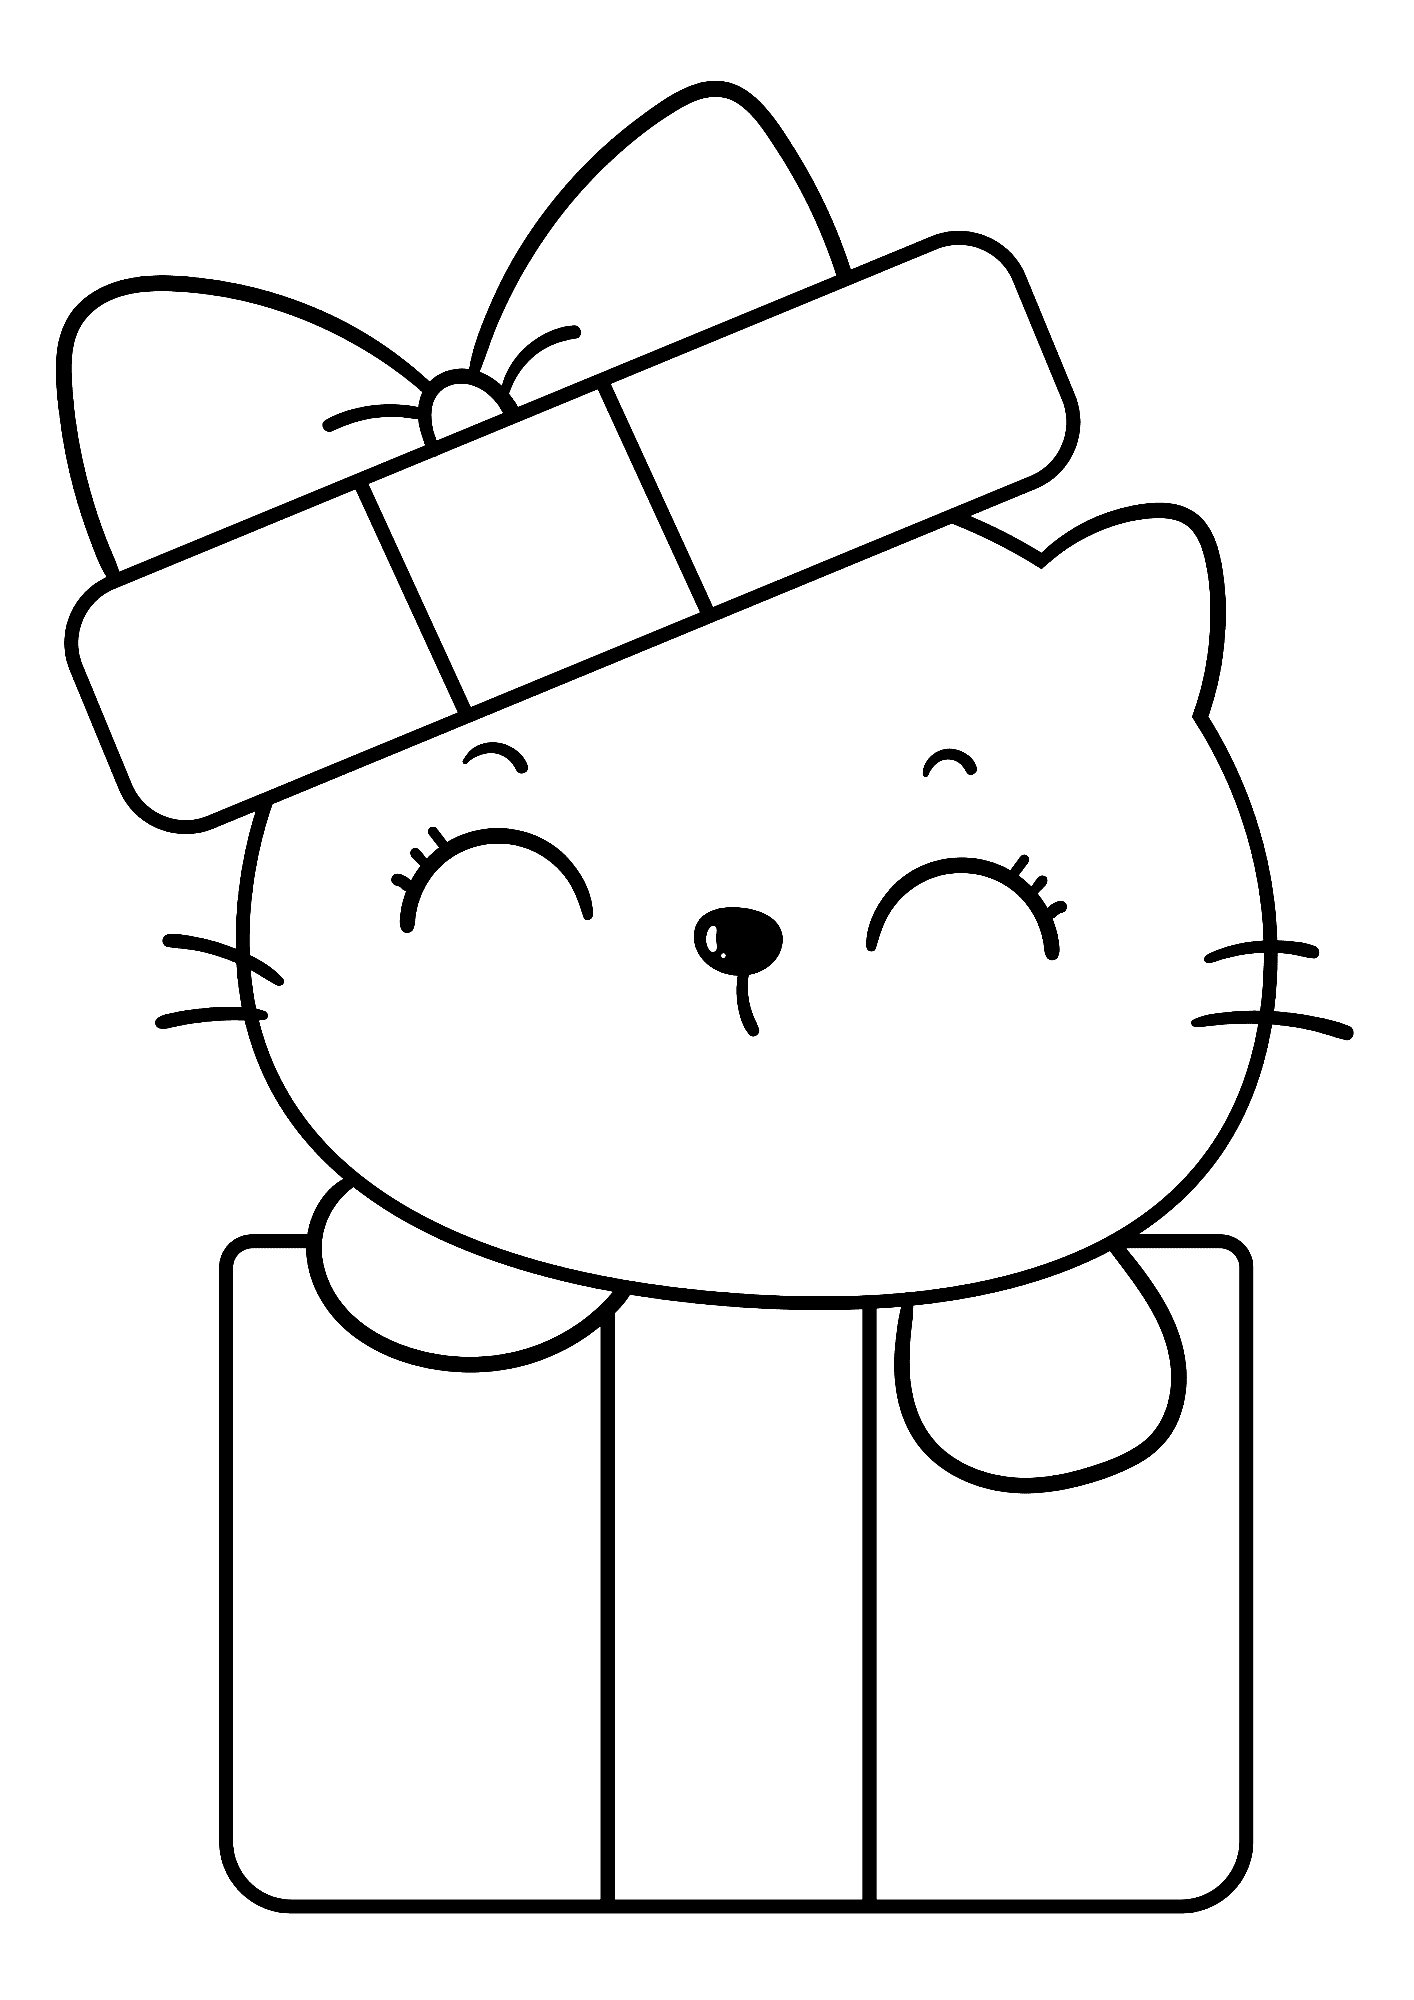 Happy Birthday Images With Cats Coloring Page